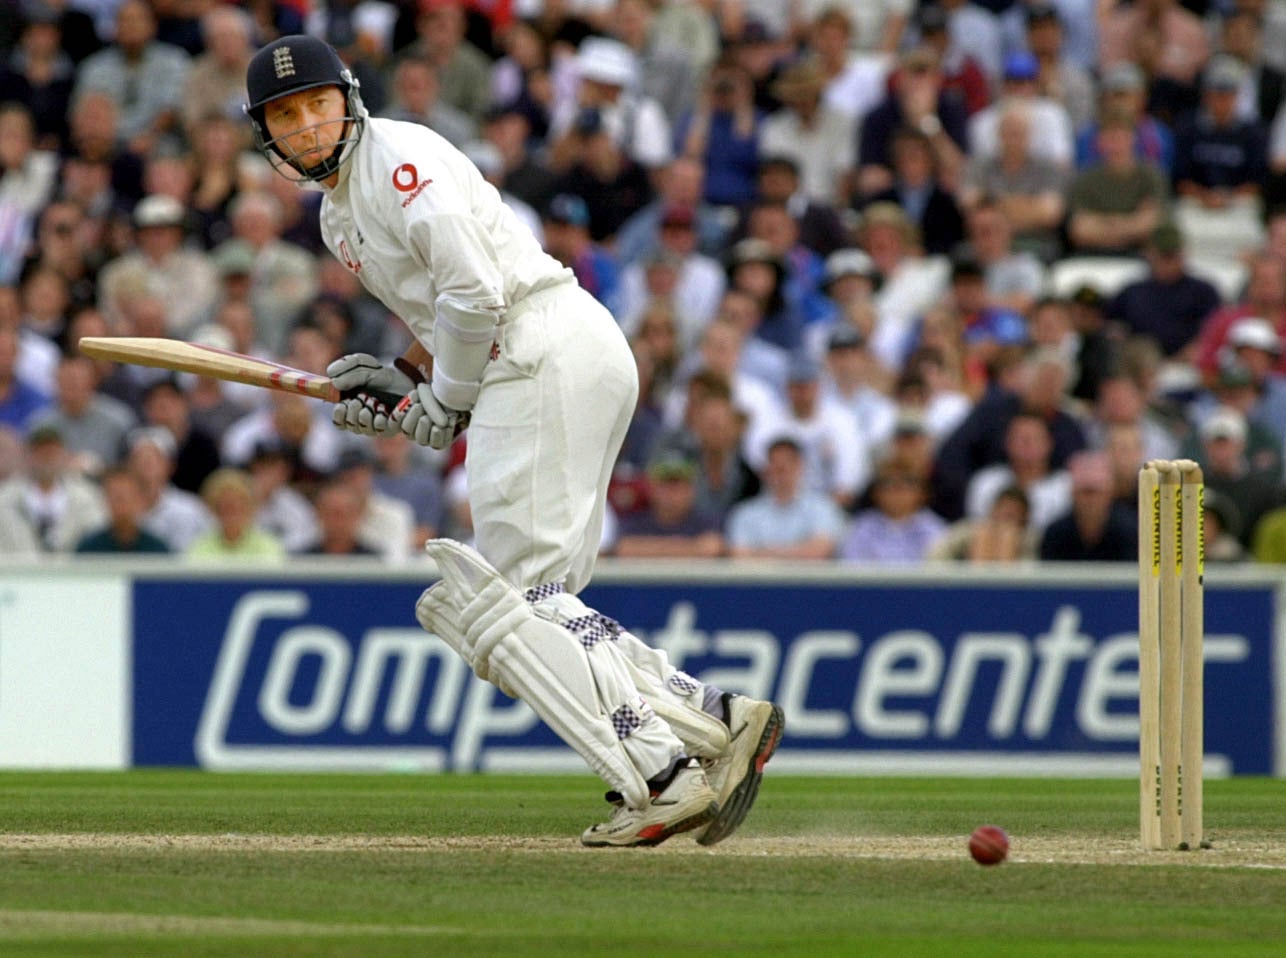 Michael Atherton was key to England’s run chase against New Zealand in Christchurch in 1997 (Rebecca Naden/PA)